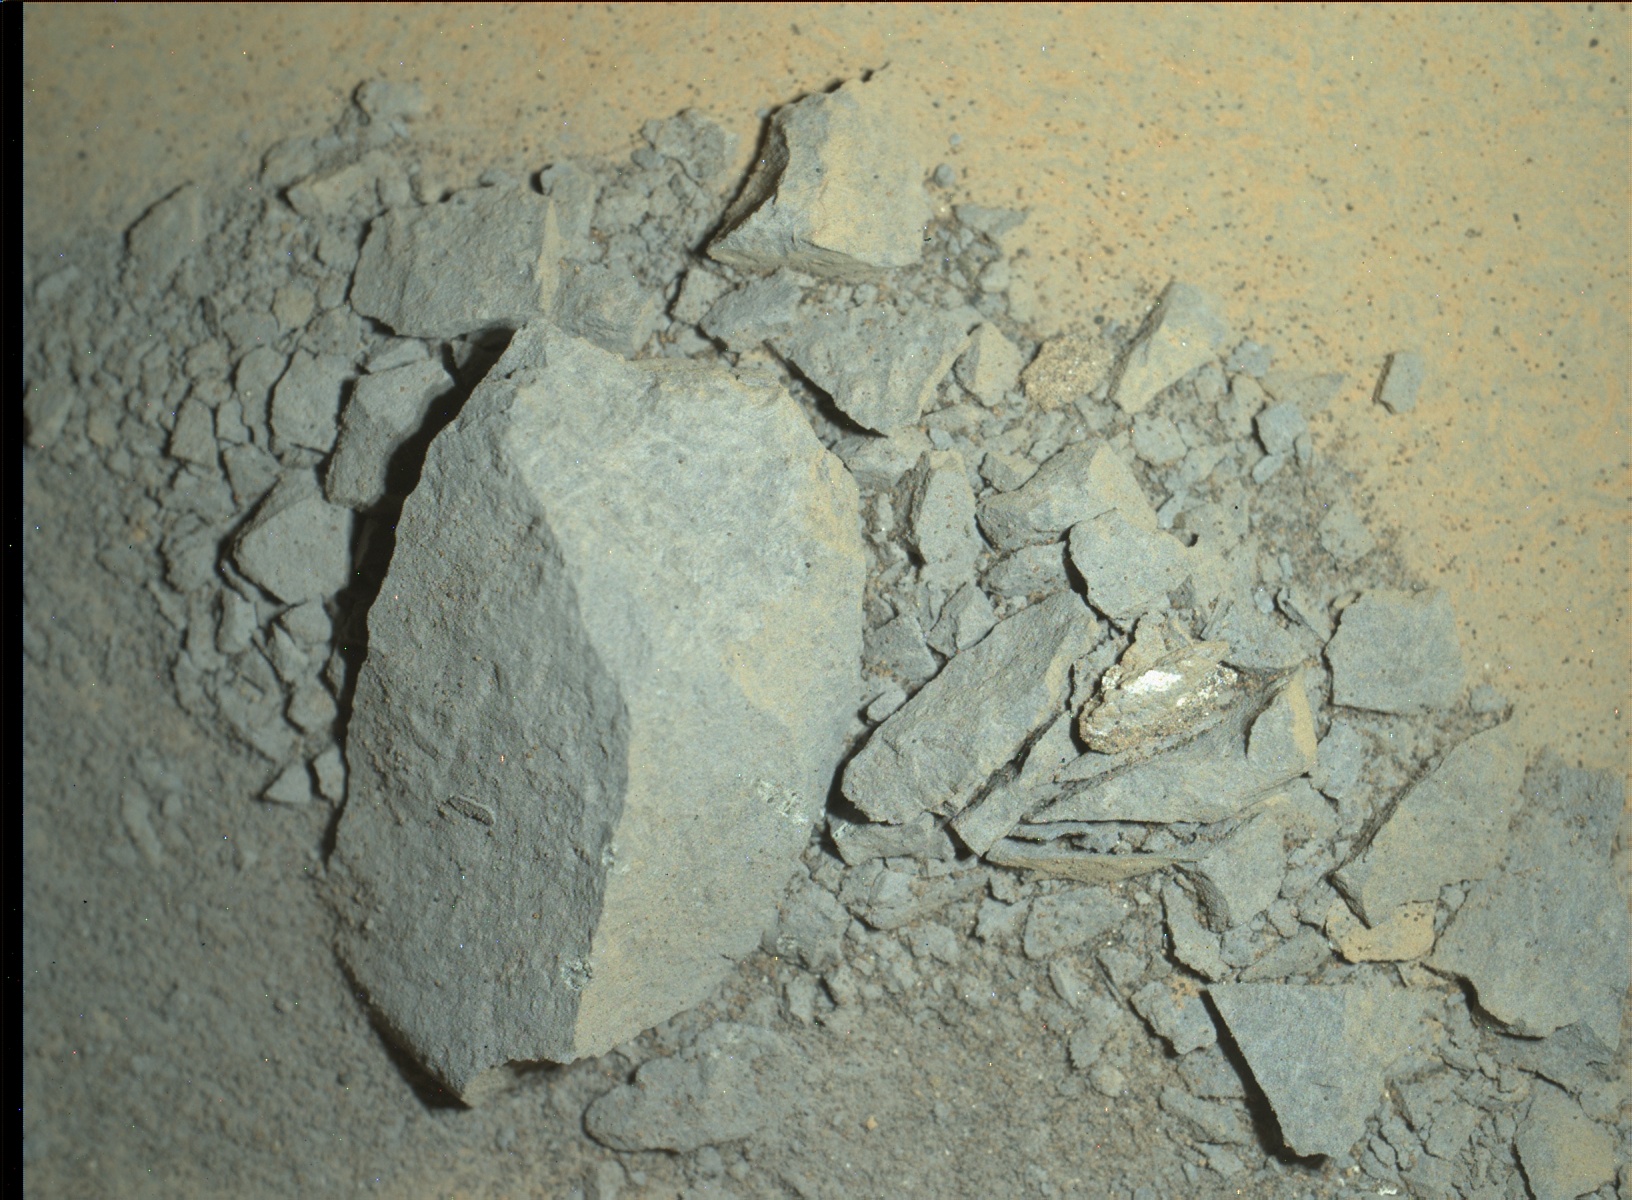 Nasa's Mars rover Curiosity acquired this image using its Mars Hand Lens Imager (MAHLI) on Sol 880